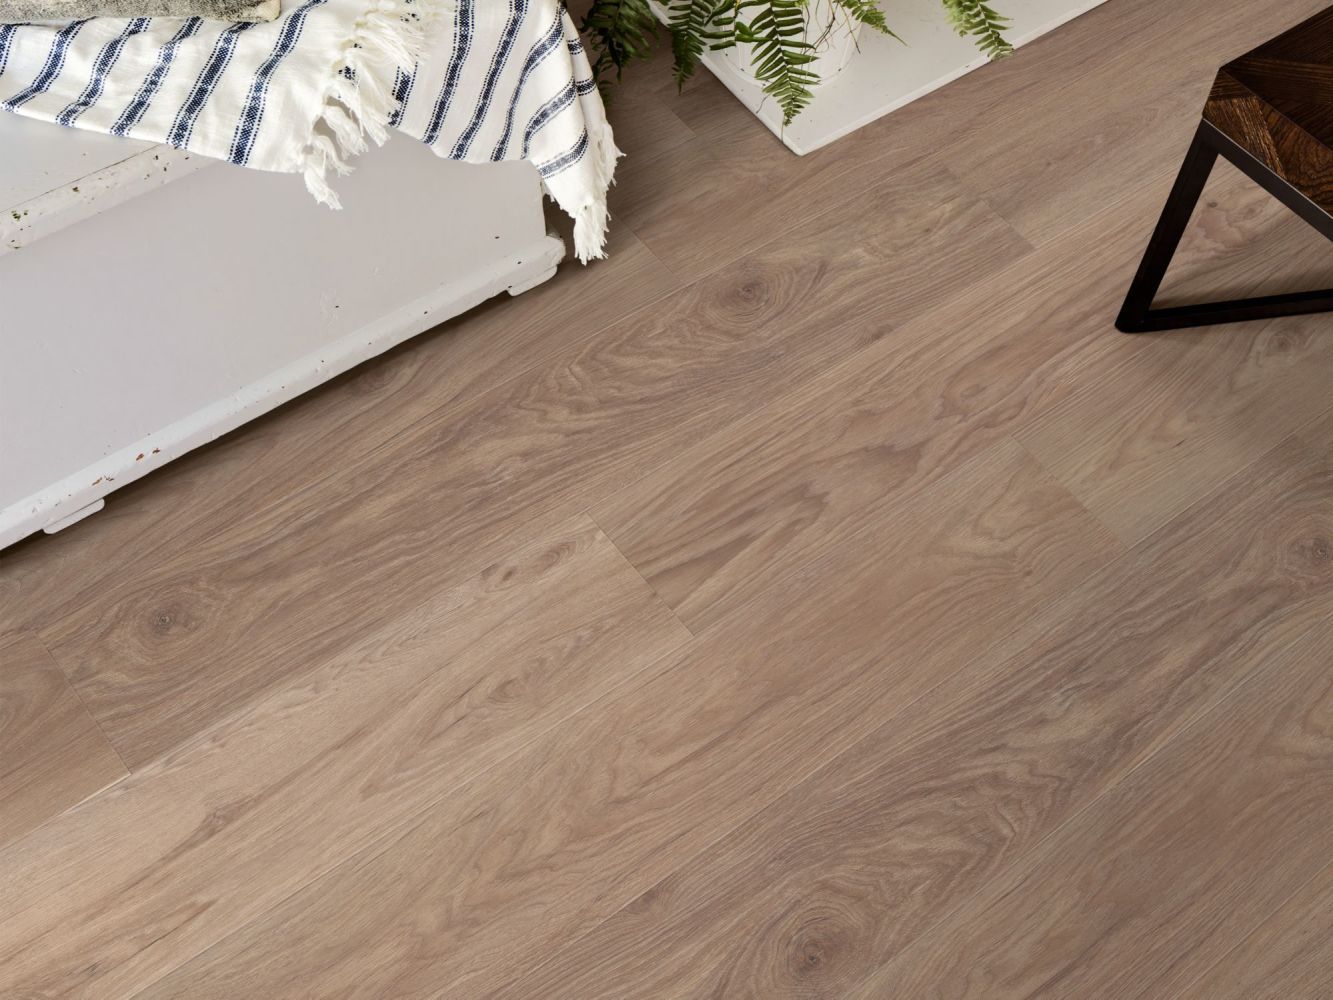 Shaw Floors Resilient Property Solutions Supino Hd+natural Bevel Truffle 07234_VE441